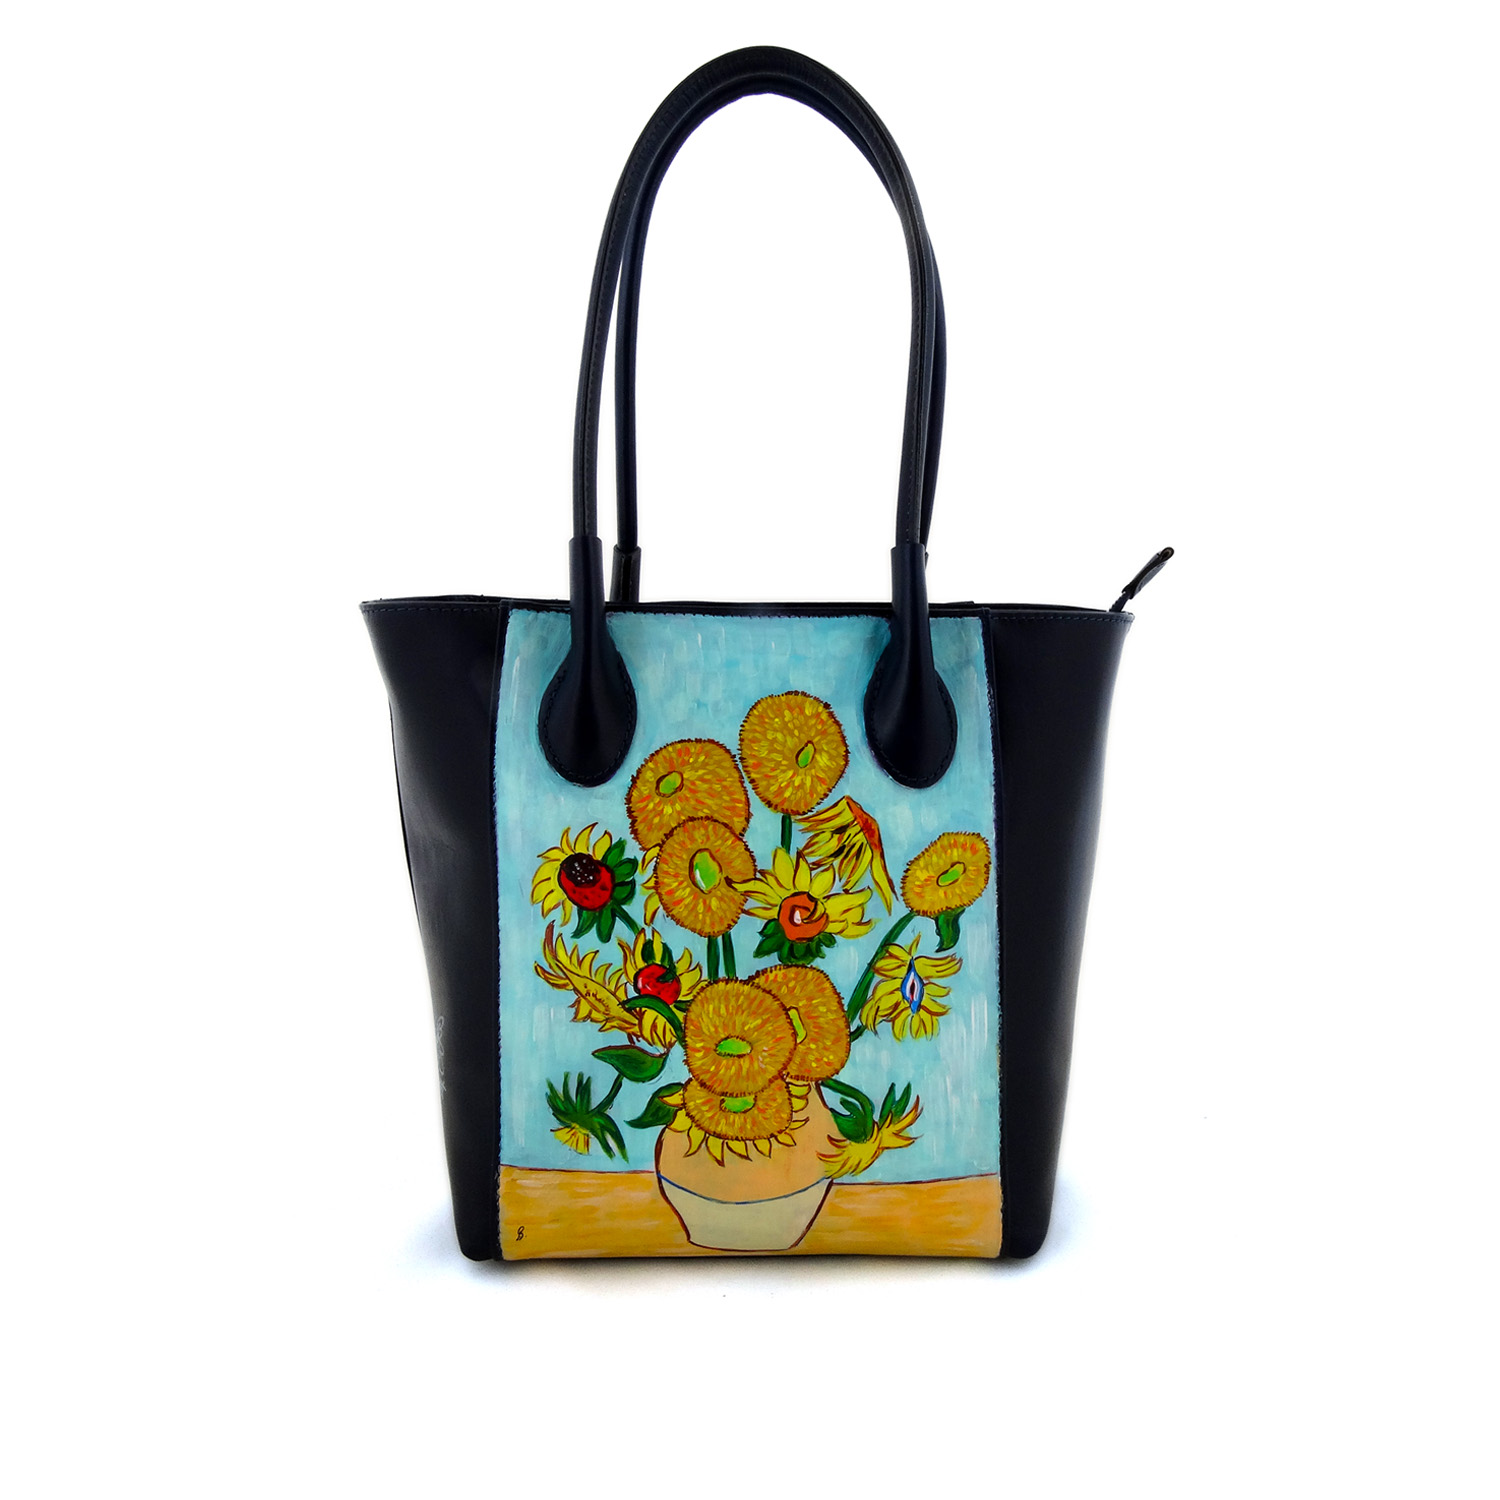 Hand painted bag - Sunflowers by Van Gogh